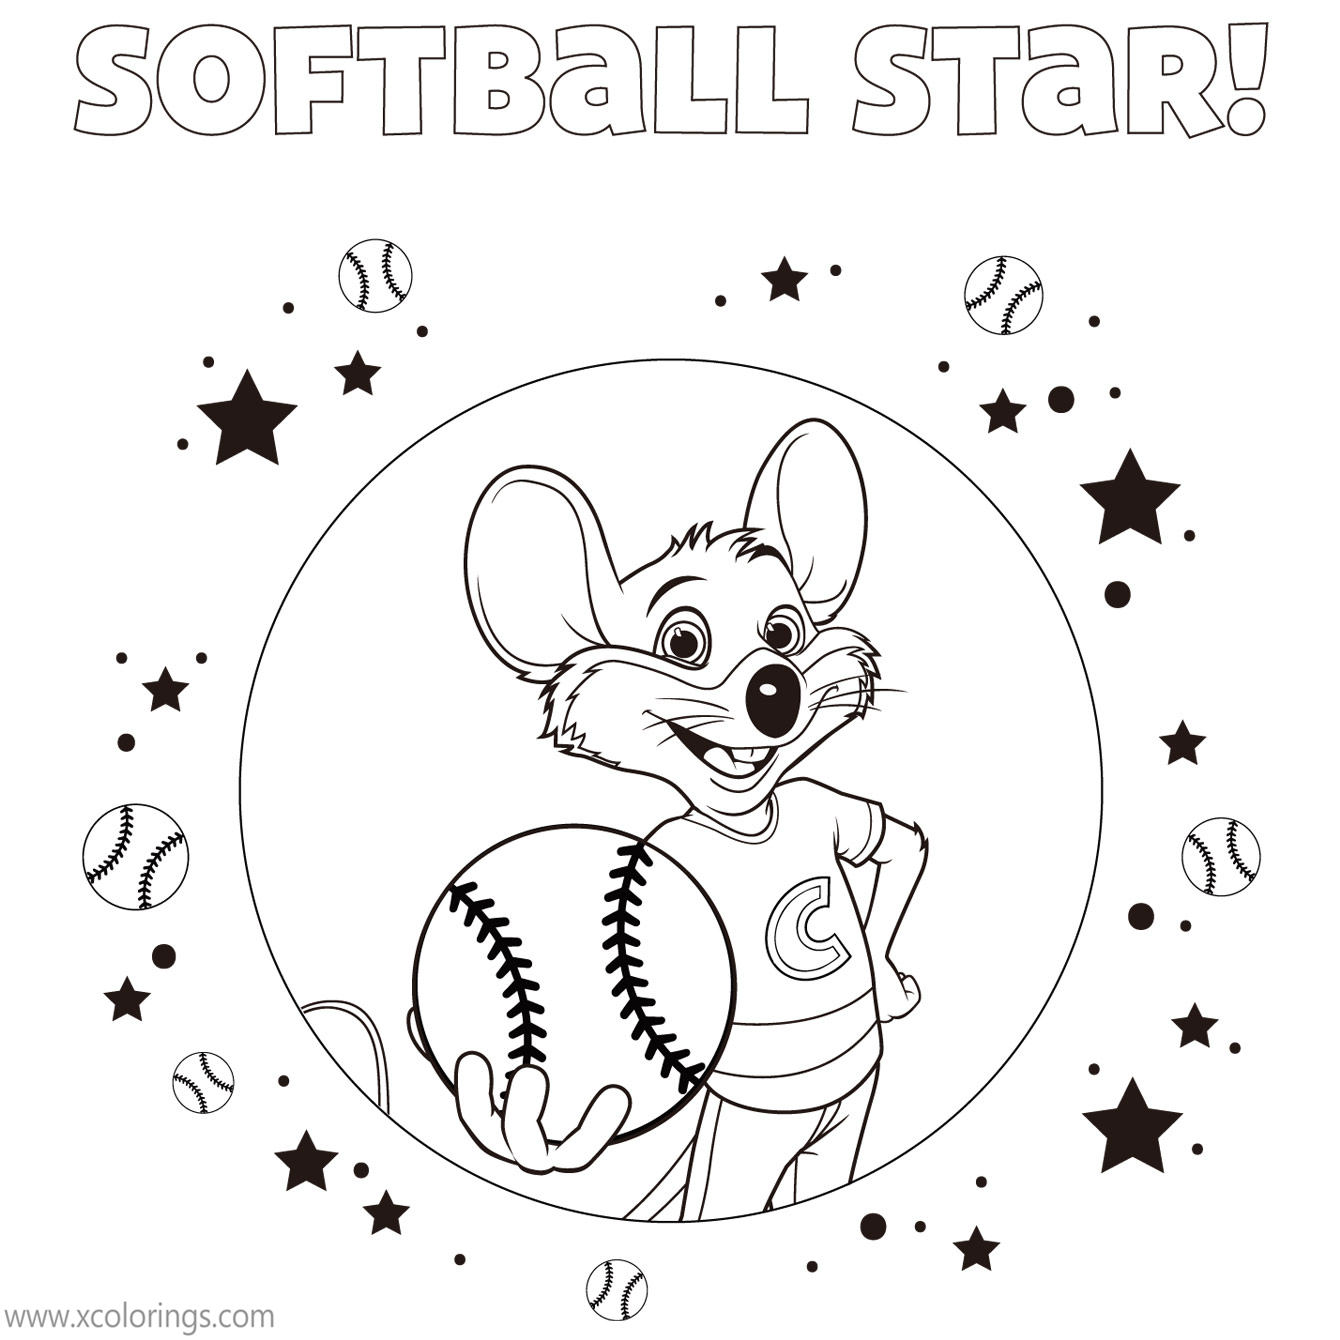 Free Chuck E Cheese Coloring Pages Softball Star printable